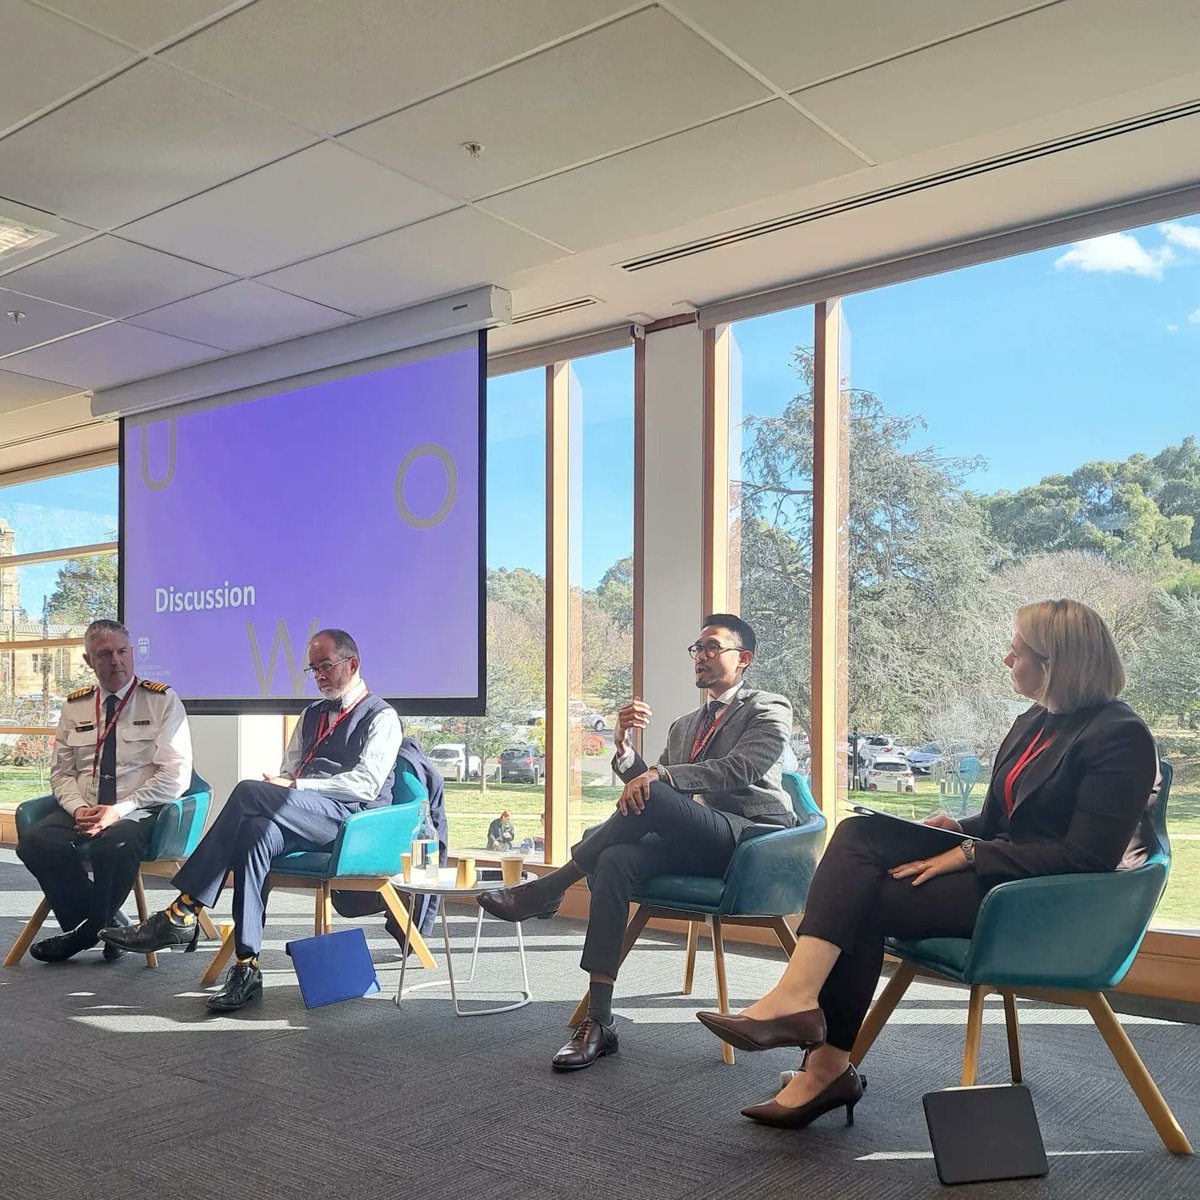 Had a great discussion today at the Australian Diplomatic Academy woman in maritime security dialogue. Pleasure to share the panel with @JAParker29 (@NSC_ANU), Prof @djag2 (@UNSWCanberra) and Capt Alastair Cooper (@Australian_Navy). Thanks @camillejgoodman for the invite! #UNCLOS